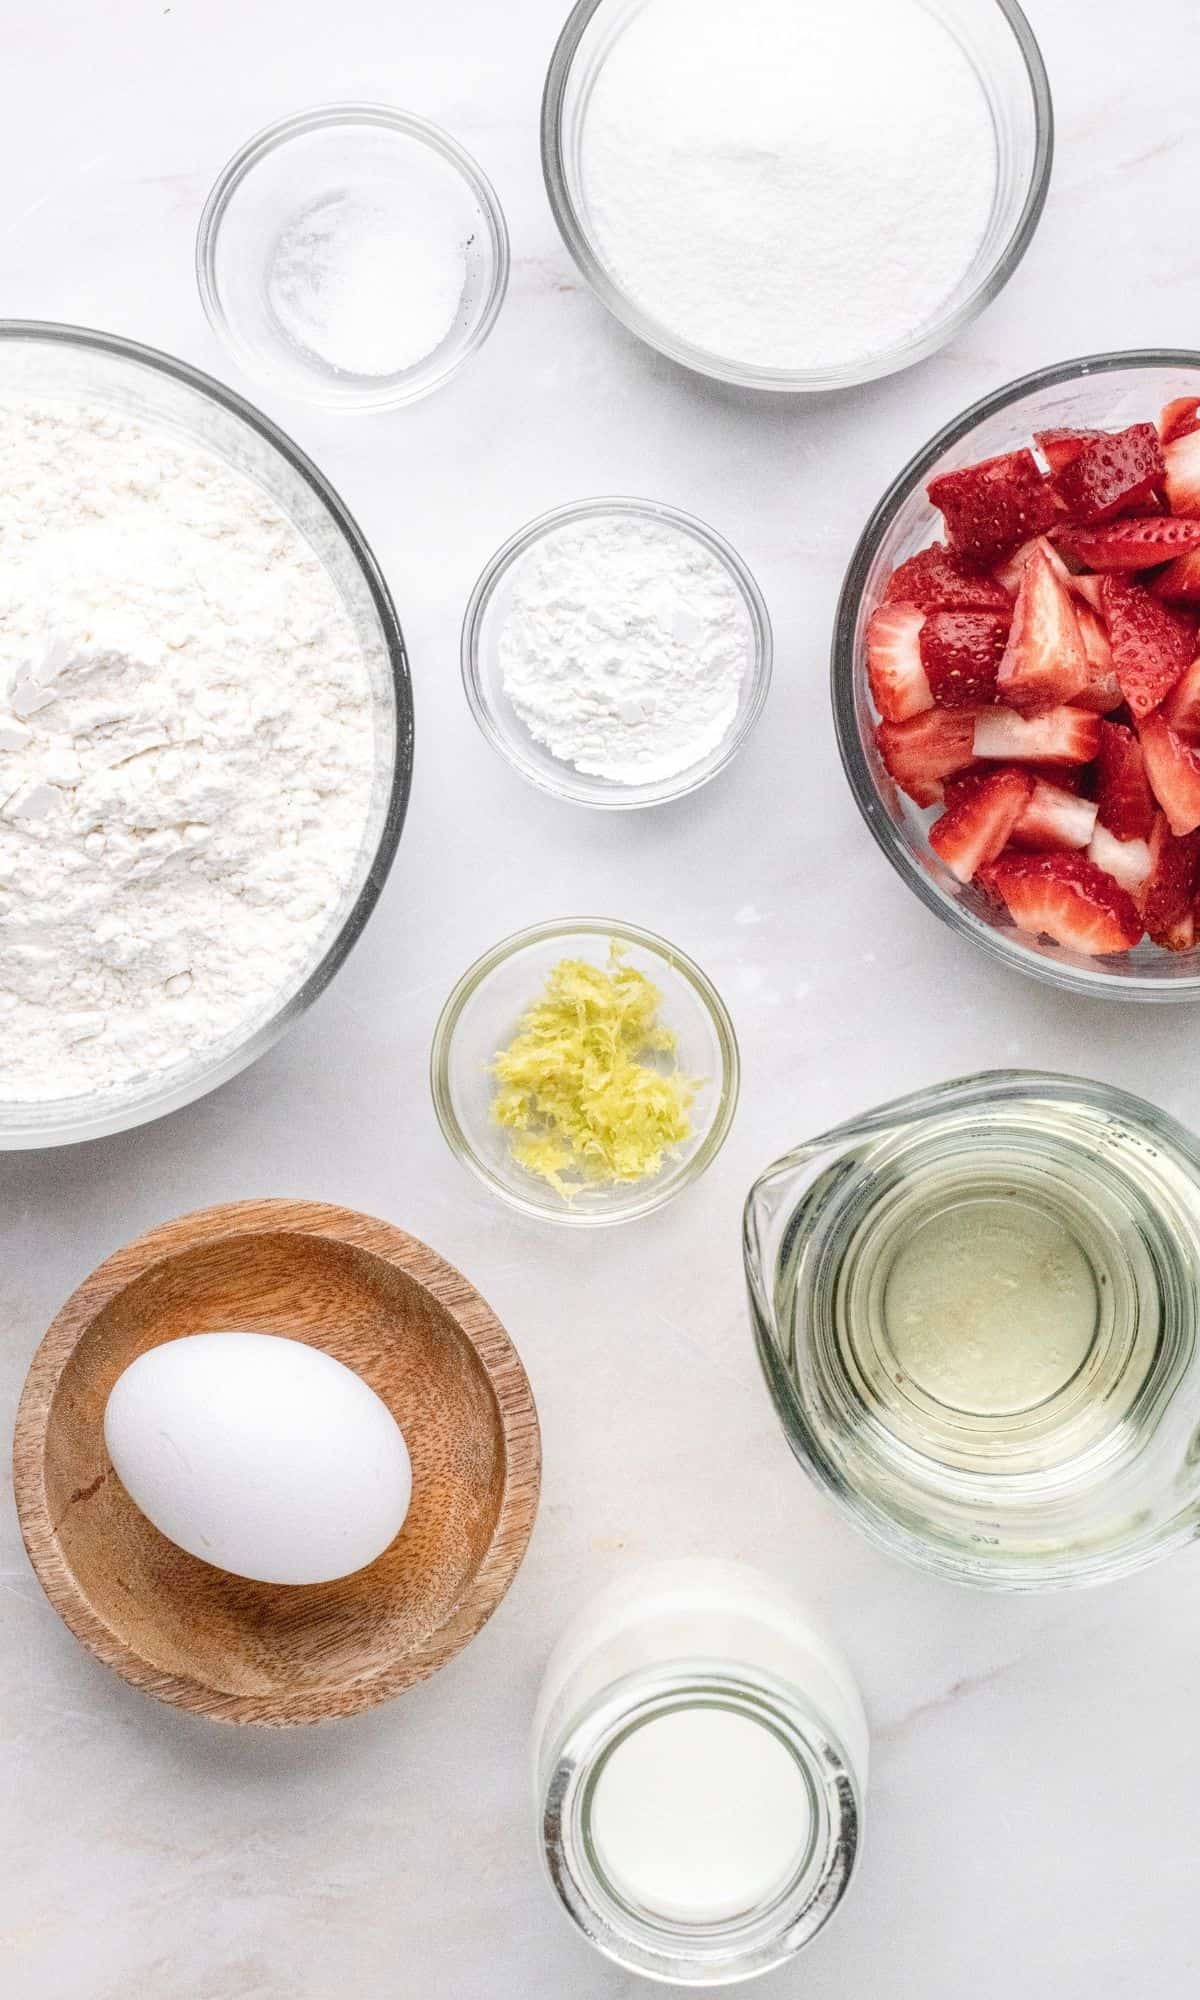 Strawberry lemon muffin ingredients in varying bowl shapes and sizes.